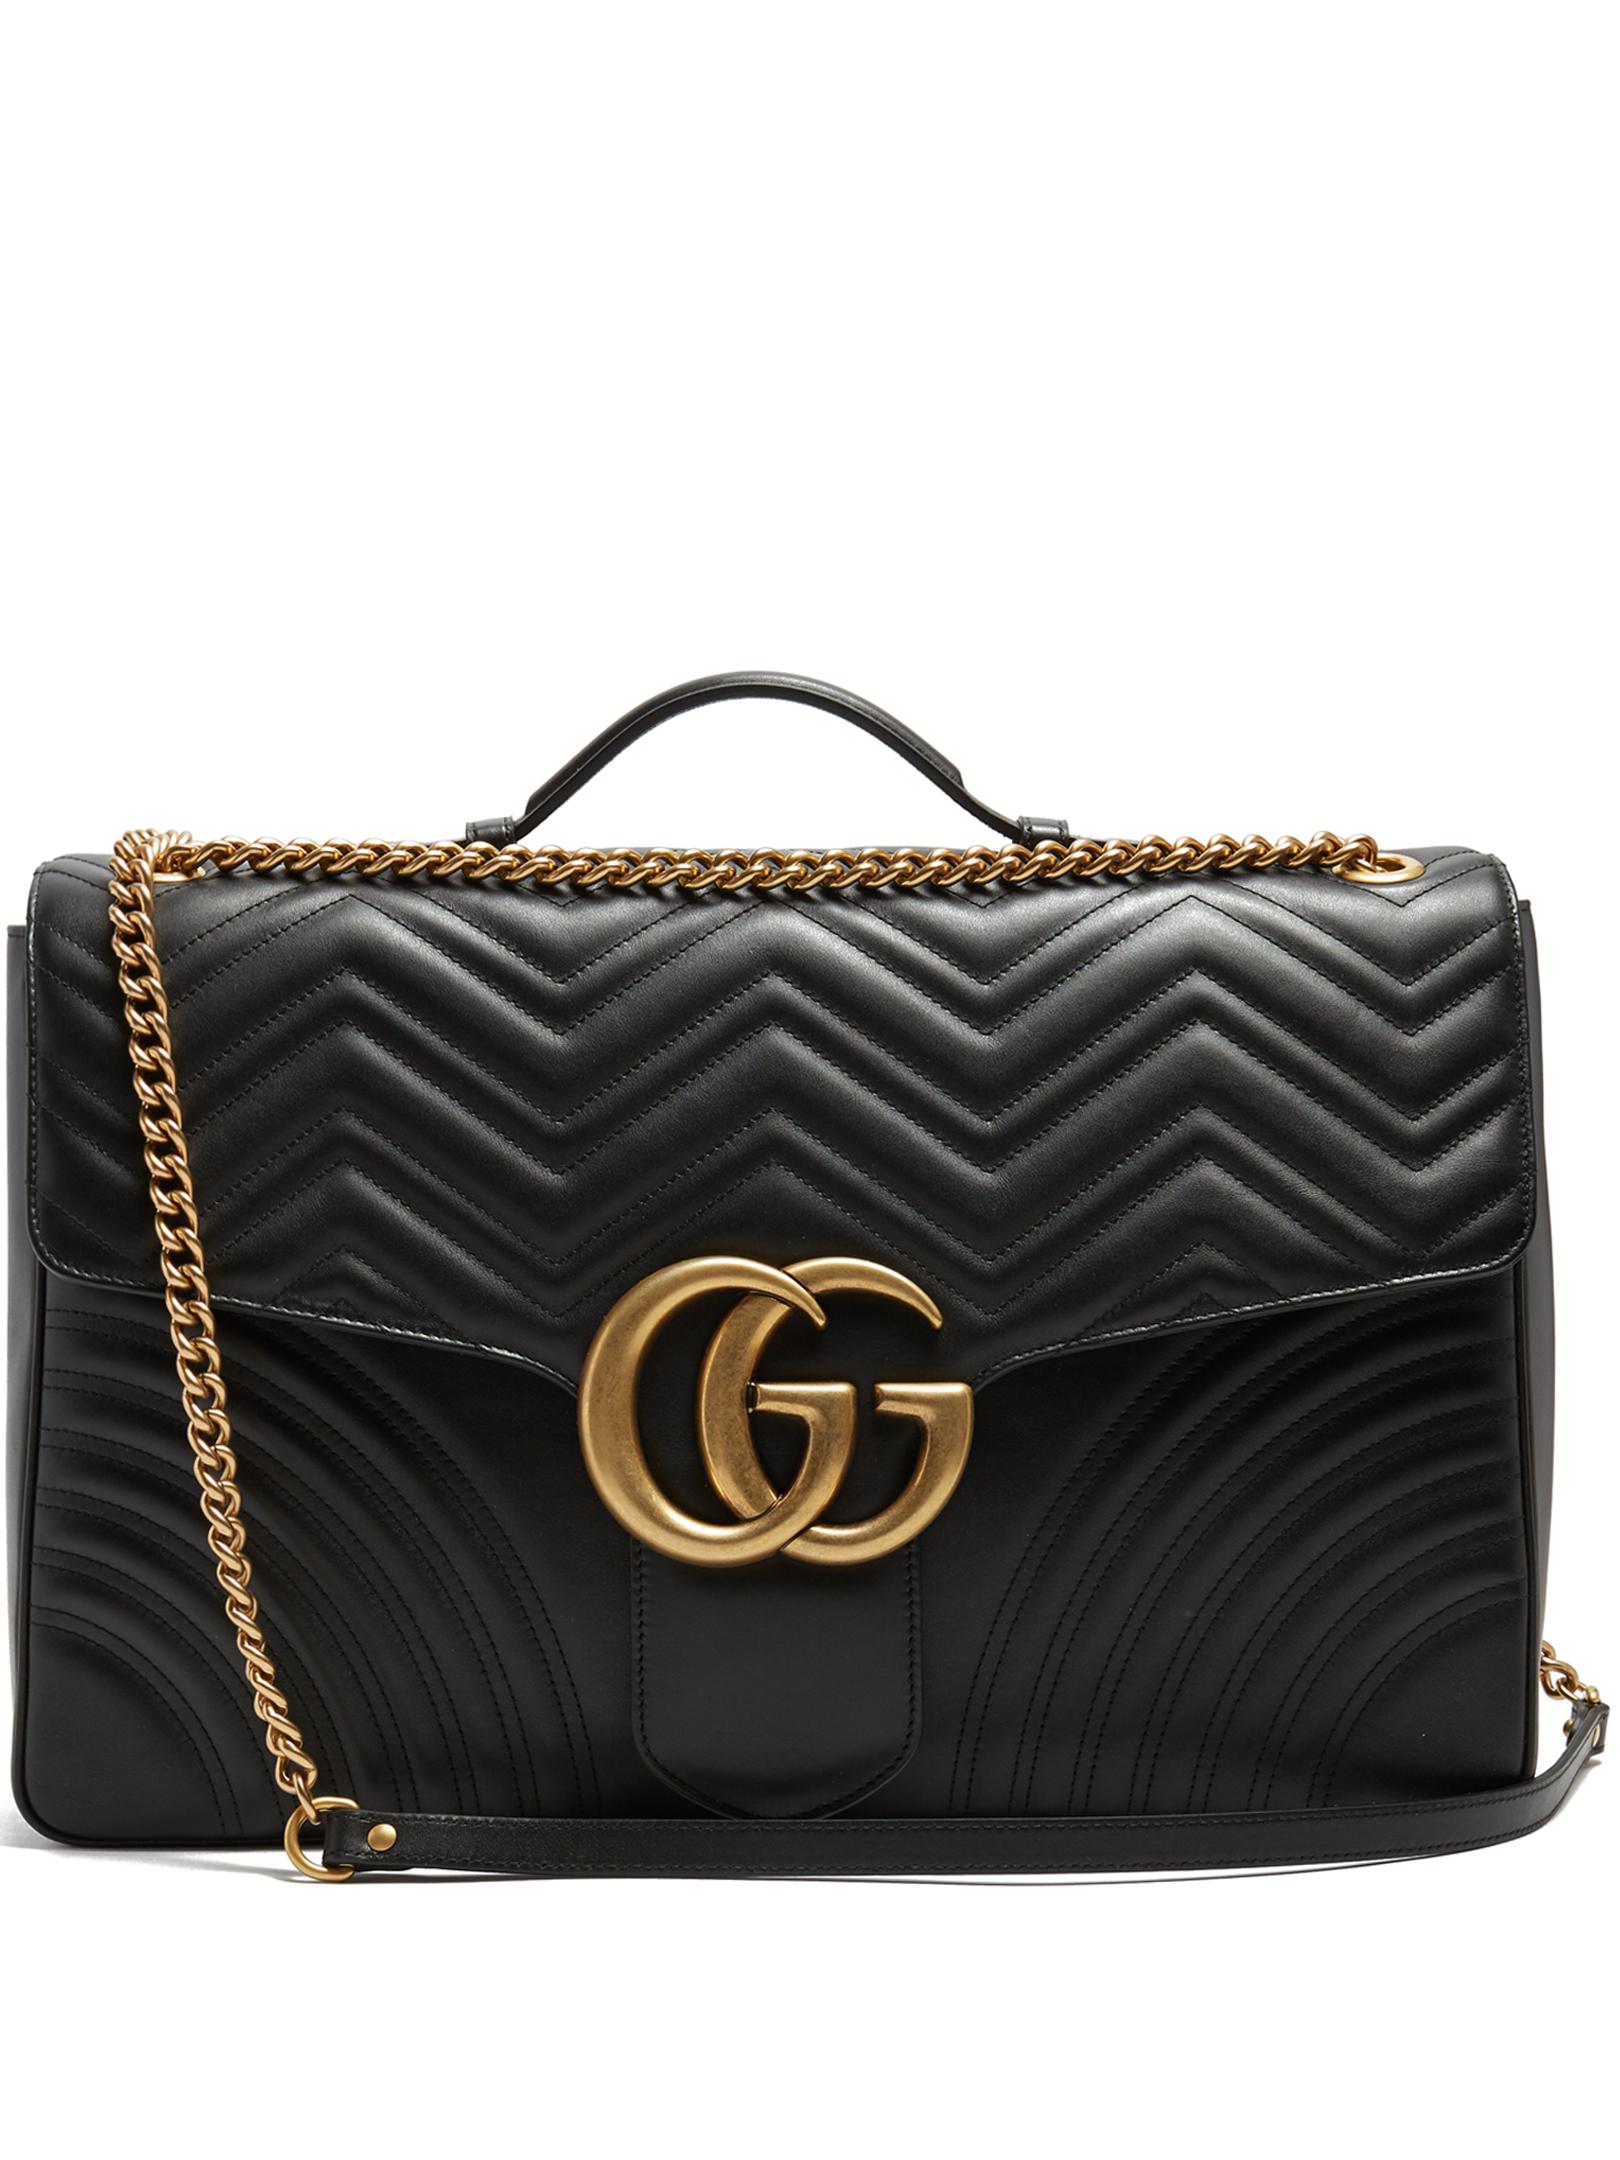 Gucci Gg Marmont Maxi Quilted-leather Shoulder Bag in Black - Lyst